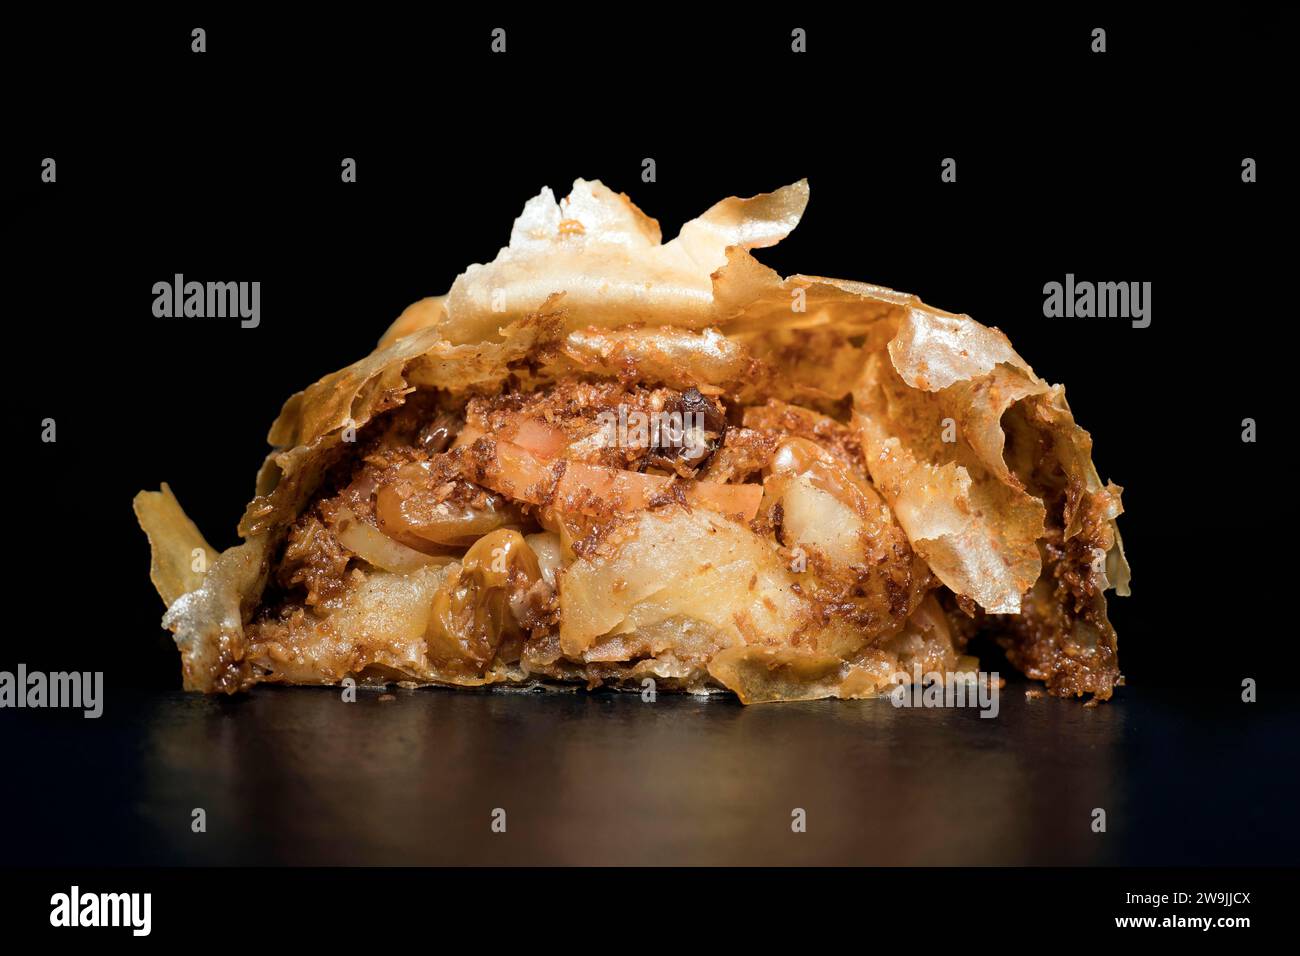 Austrian apple strudel with rum sultanas, cinnamon and very thin crispy strudel dough, food photography with black background Stock Photo